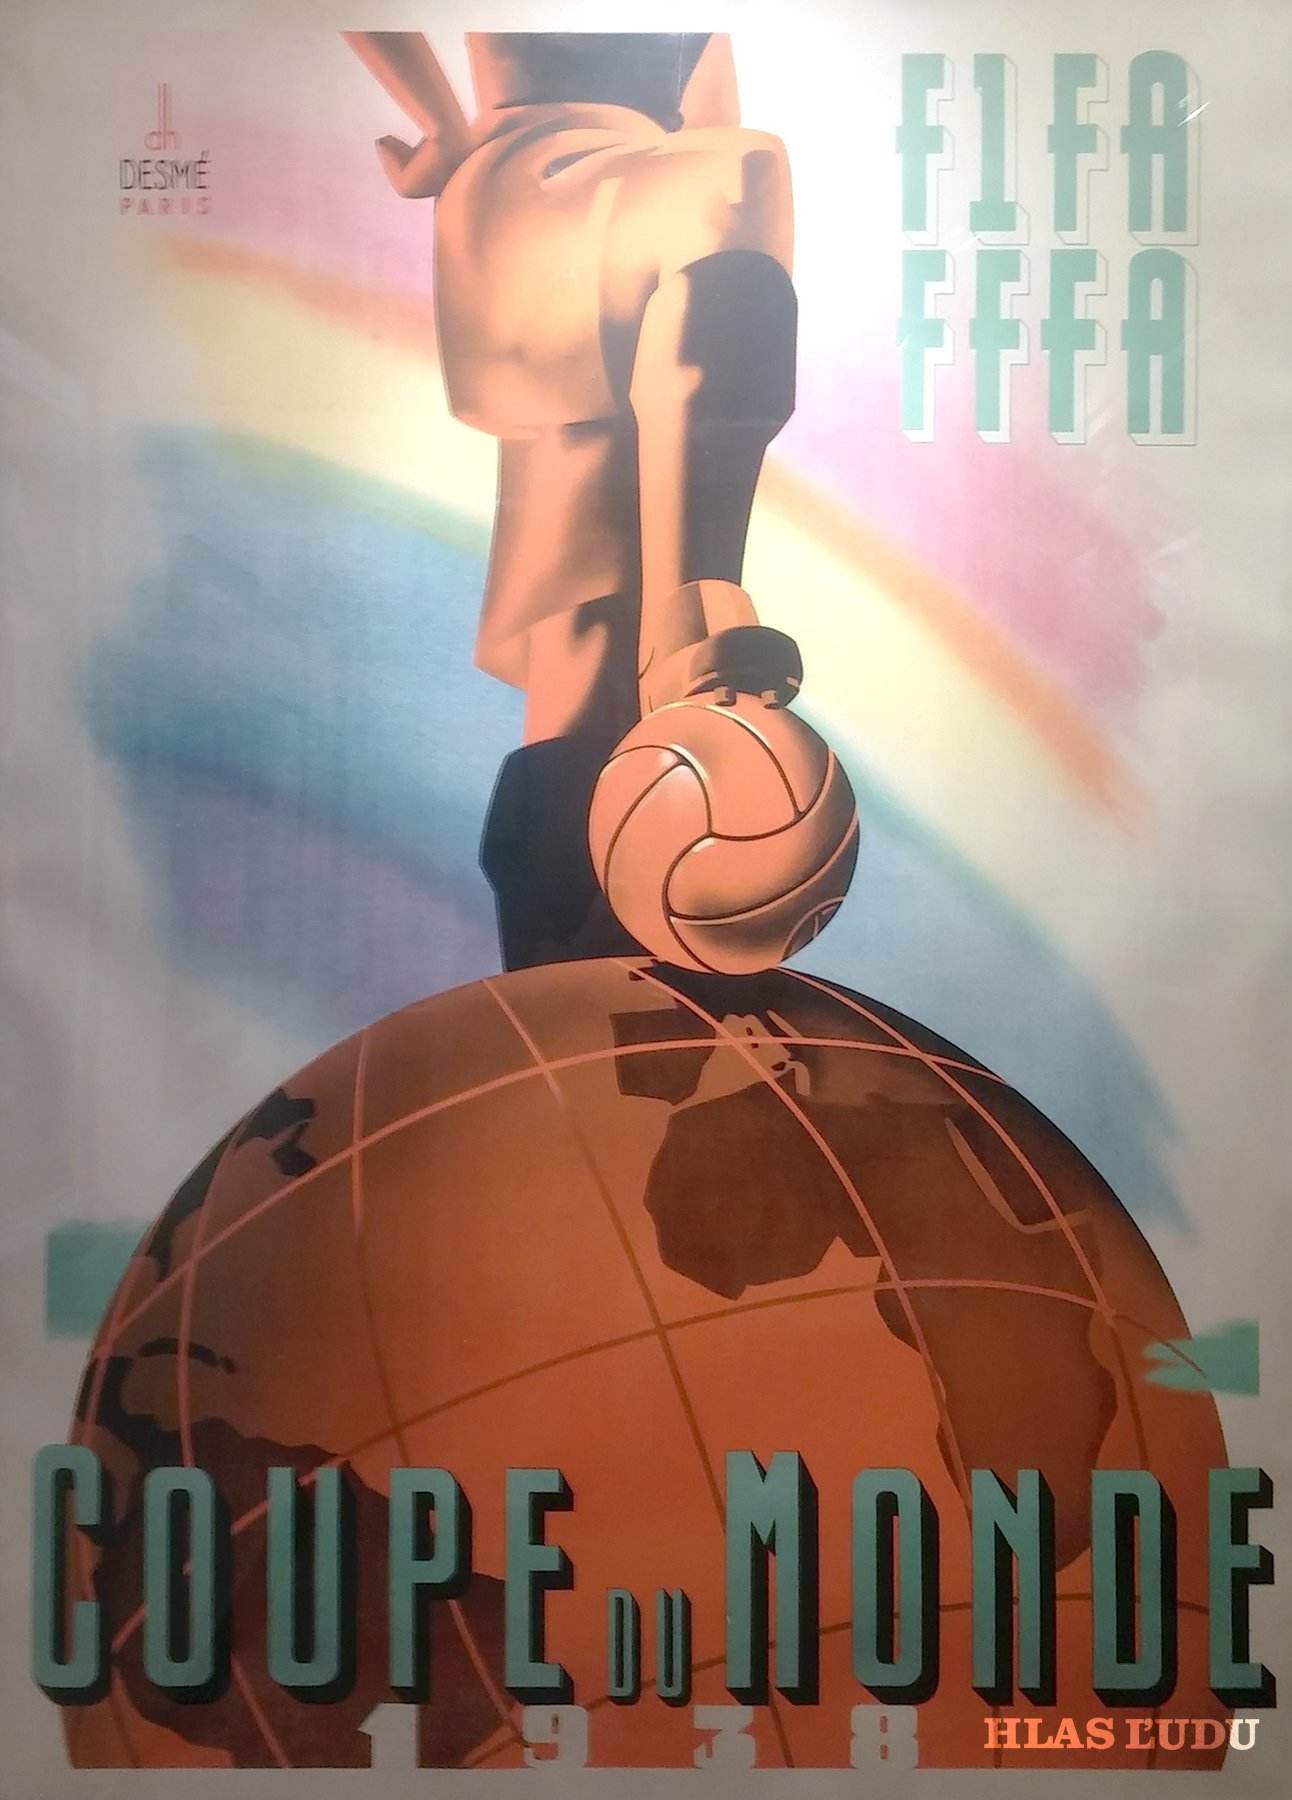 Foto: World Cup Posters